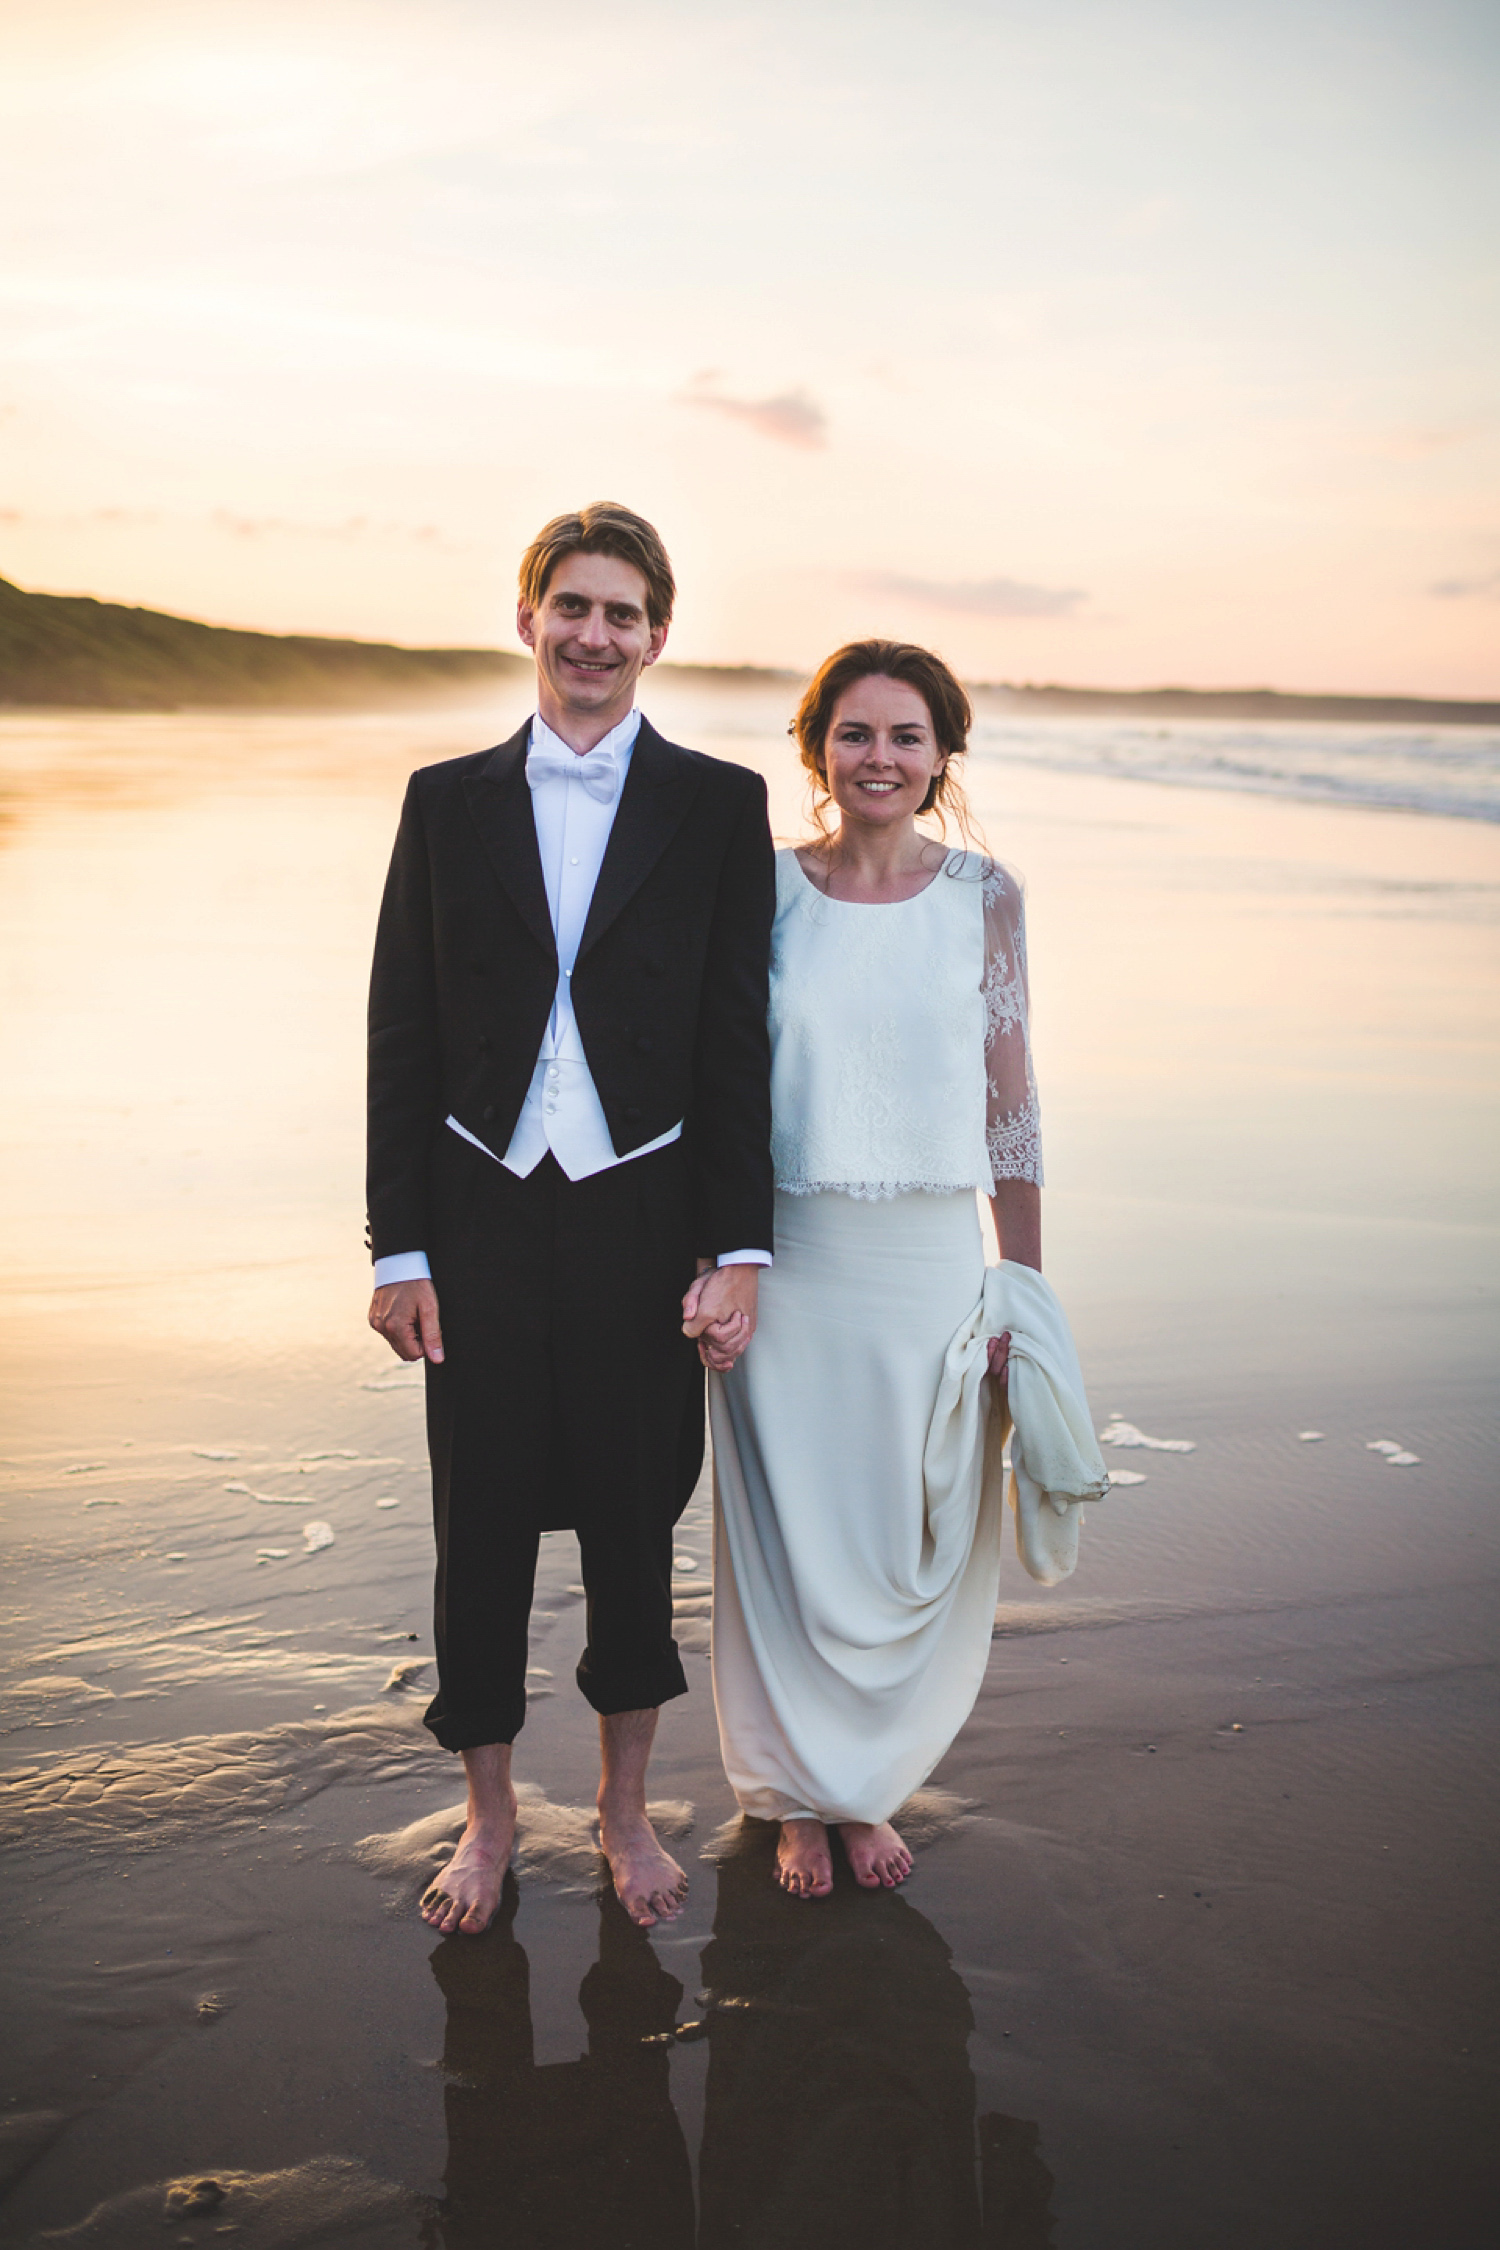 Bride Kate wore a Laure de Sagazan skirt and Elise Hameau top, both from The Mews Bridal of Notting Hill for her wedding in Filey North Yorkshire. Images by Photography34.